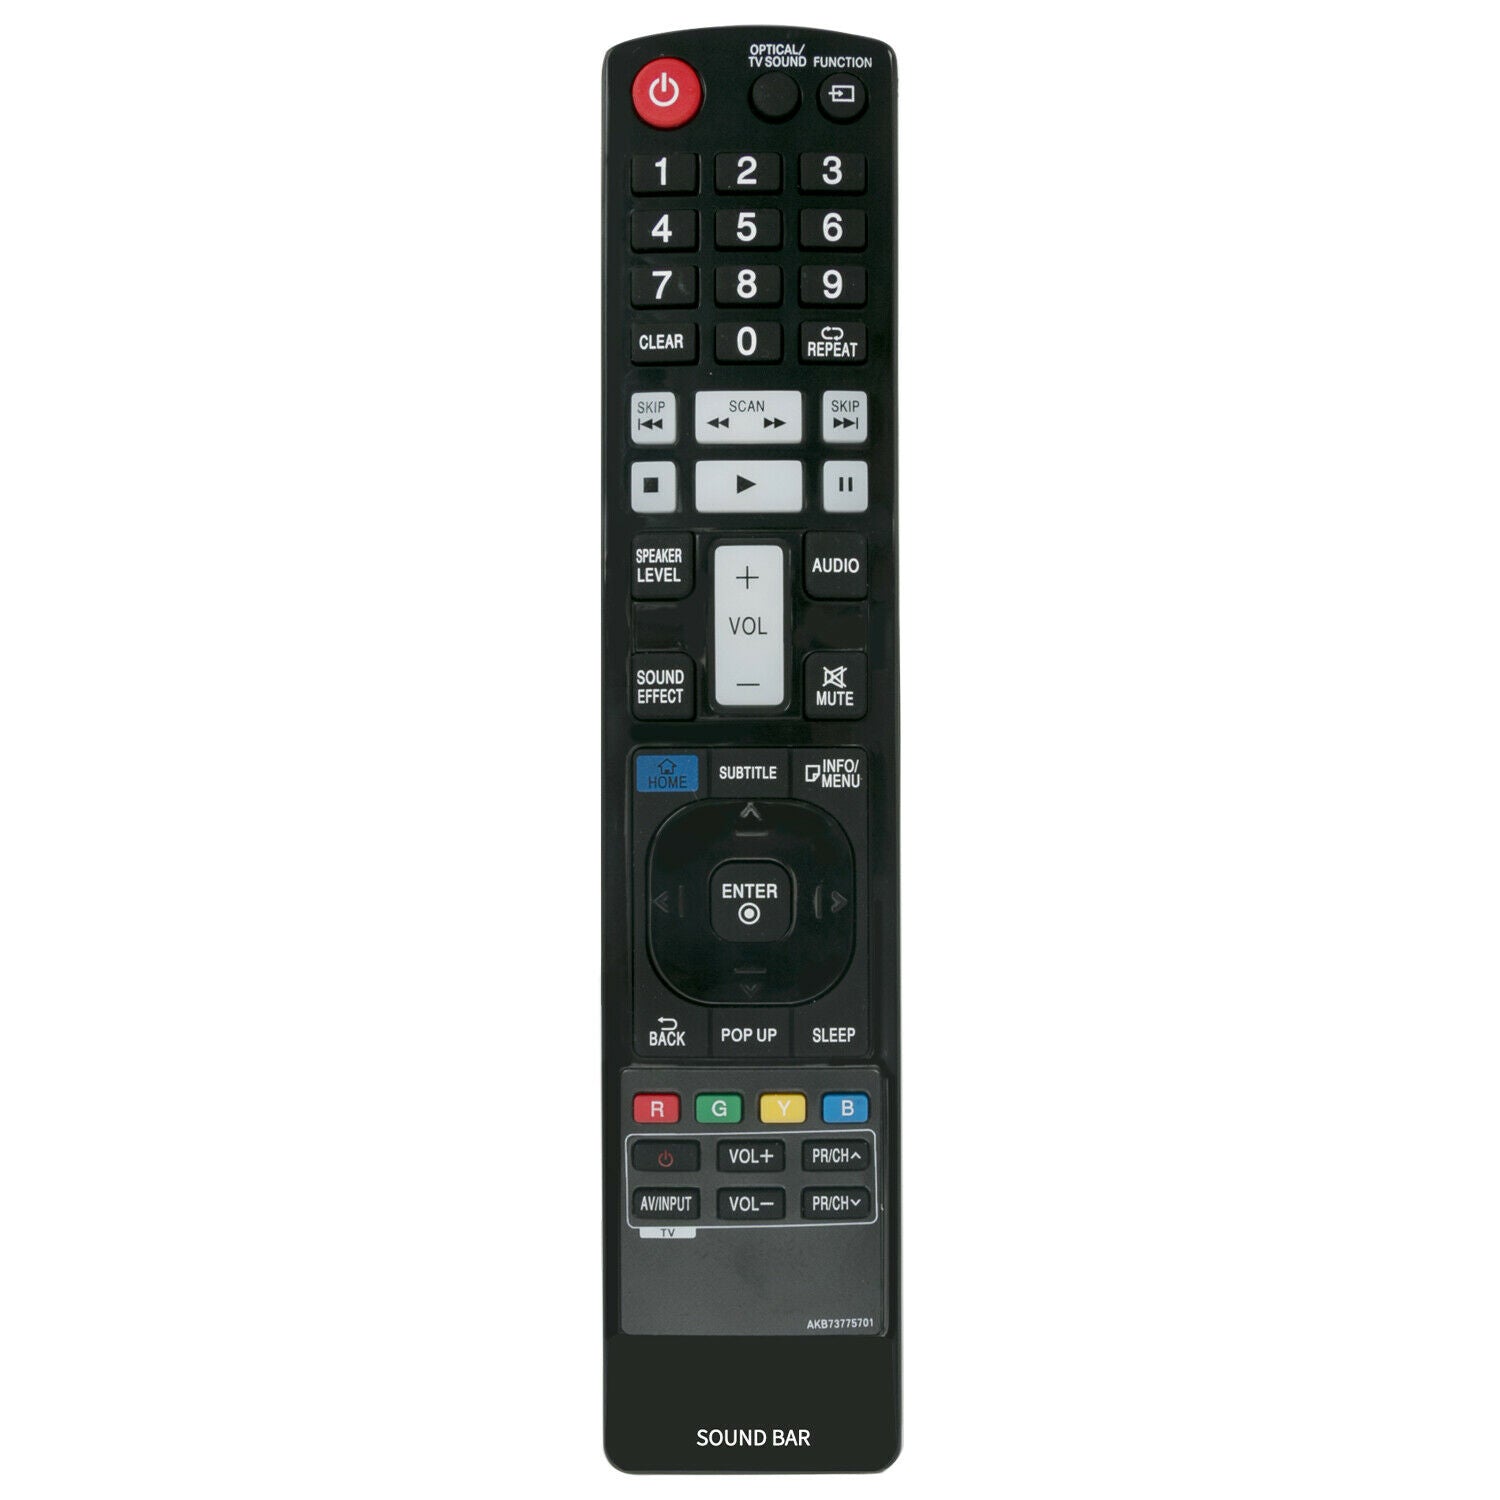 AKB73775701 Replacement Remote Control for LG Sound Bar NB3730A NB3740 S33A1-D